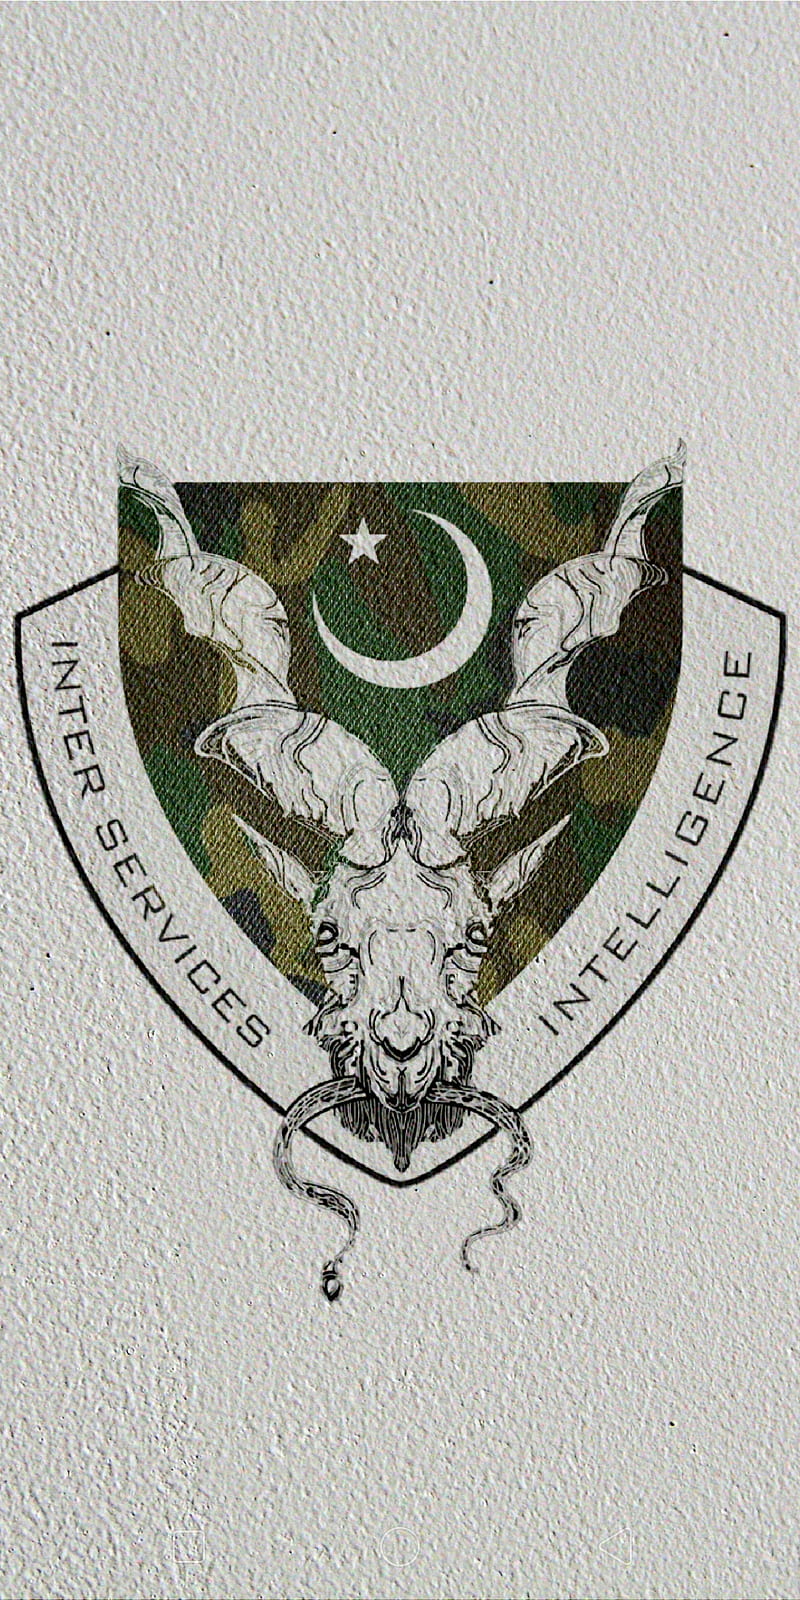 ISI Pakistan, isi, isi agency, isi agent, pak army, pakistan commandos, pakistan flag, pakistan isi, specialservice group, ssg commandos, HD phone wallpaper